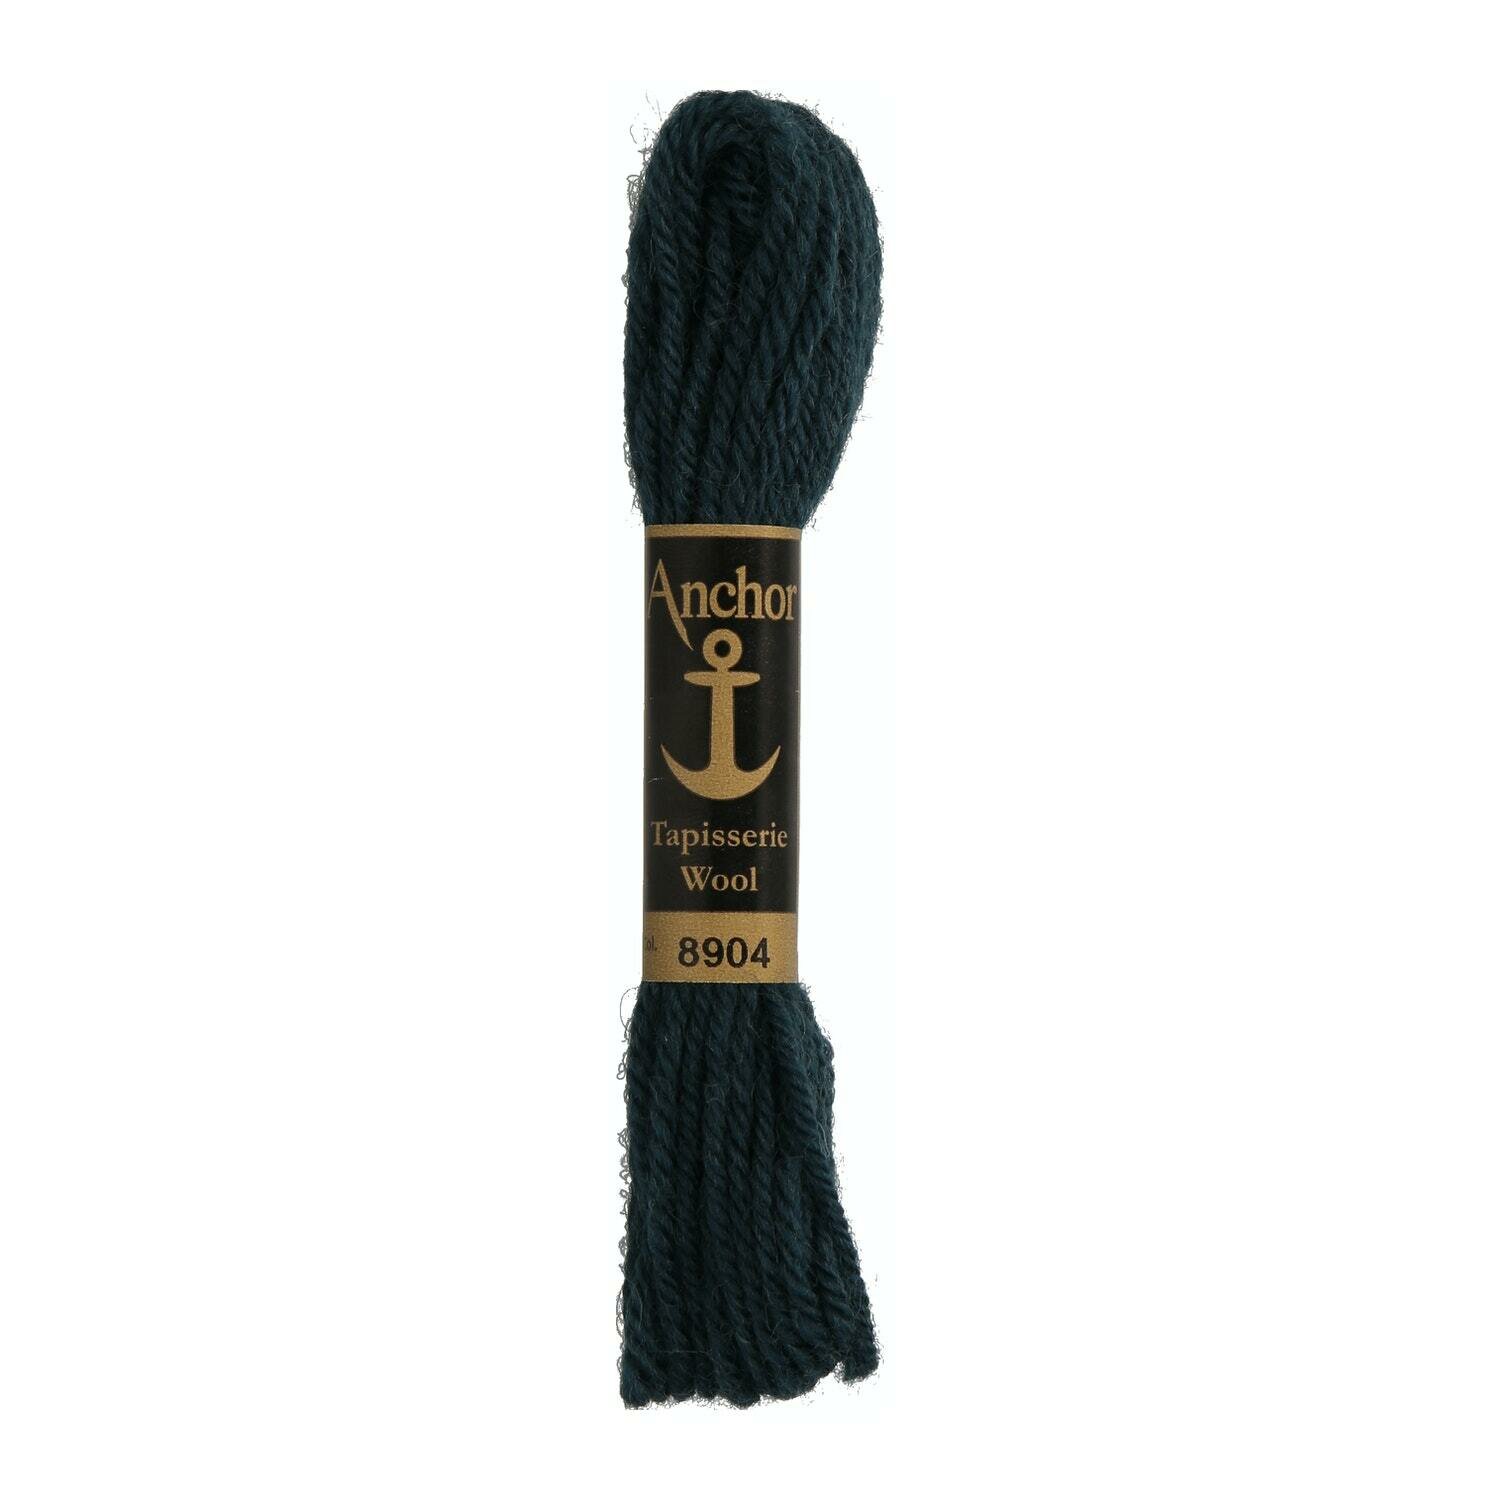 Anchor Tapisserie Wool # 08970